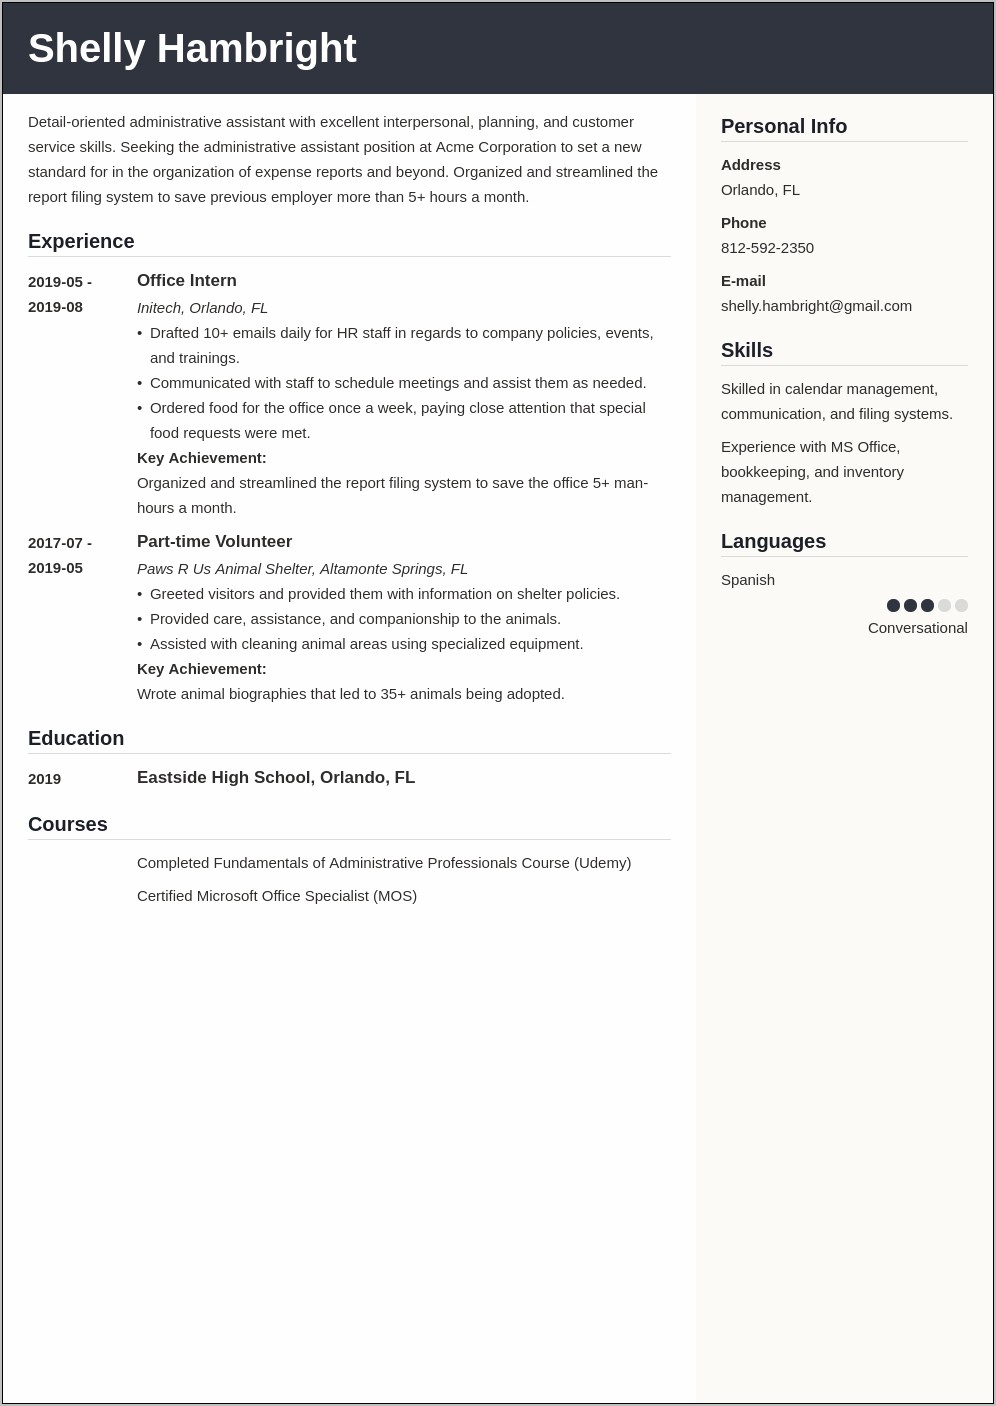 Resume Objective Statement For Admin Assistant